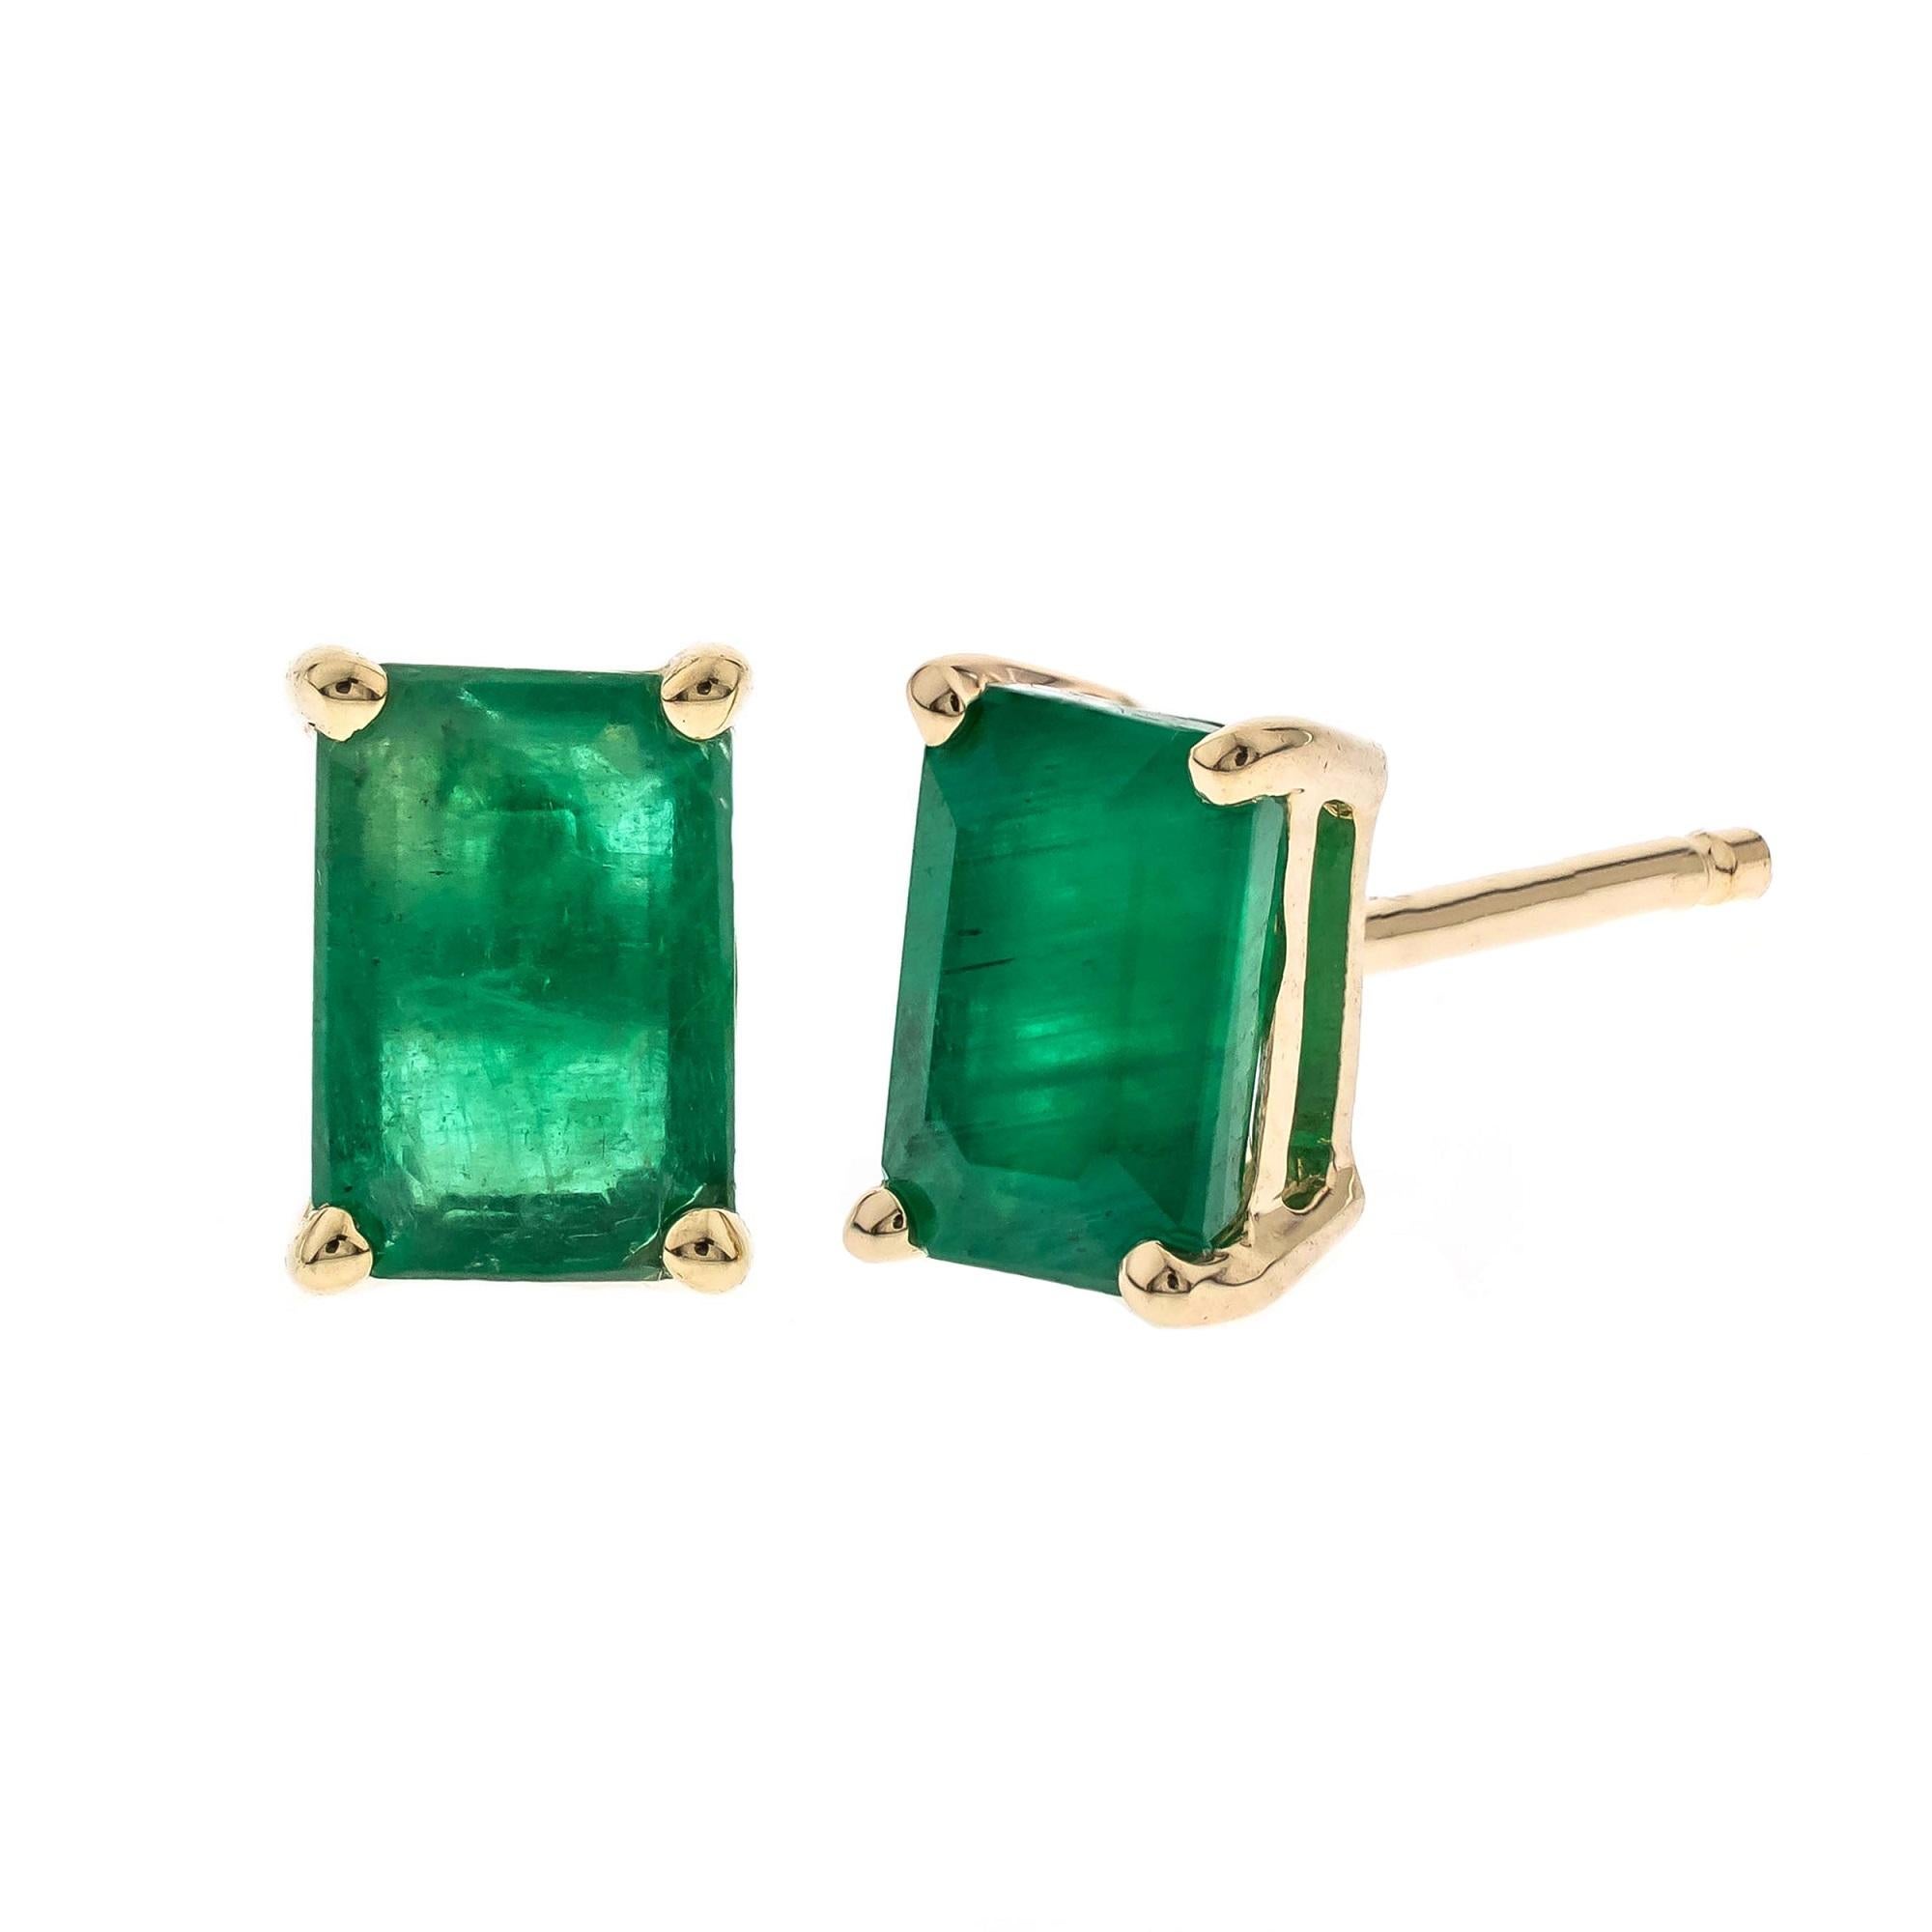 Decorate yourself in elegance with this Earring is crafted from 14K Yellow Gold by Gin & Grace Earring. The jewelry boasts 4X6 Emerald-Cut prong setting Emerald (2 pcs) 1.10 Carat. This Earring is weight 1.0 grams. This delicate Earring is polished